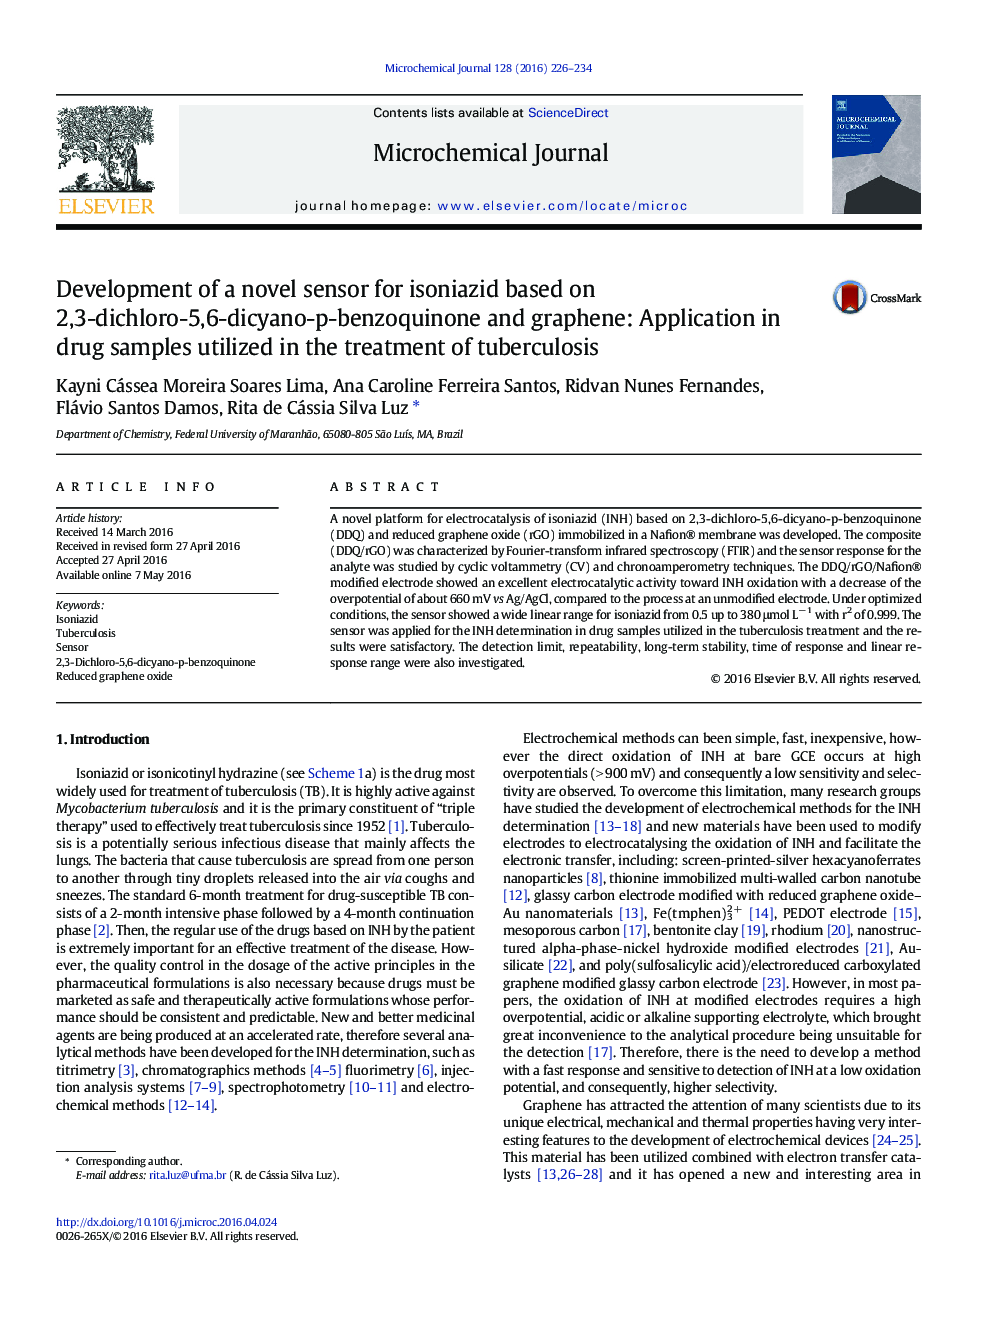 Development of a novel sensor for isoniazid based on 2,3-dichloro-5,6-dicyano-p-benzoquinone and graphene: Application in drug samples utilized in the treatment of tuberculosis